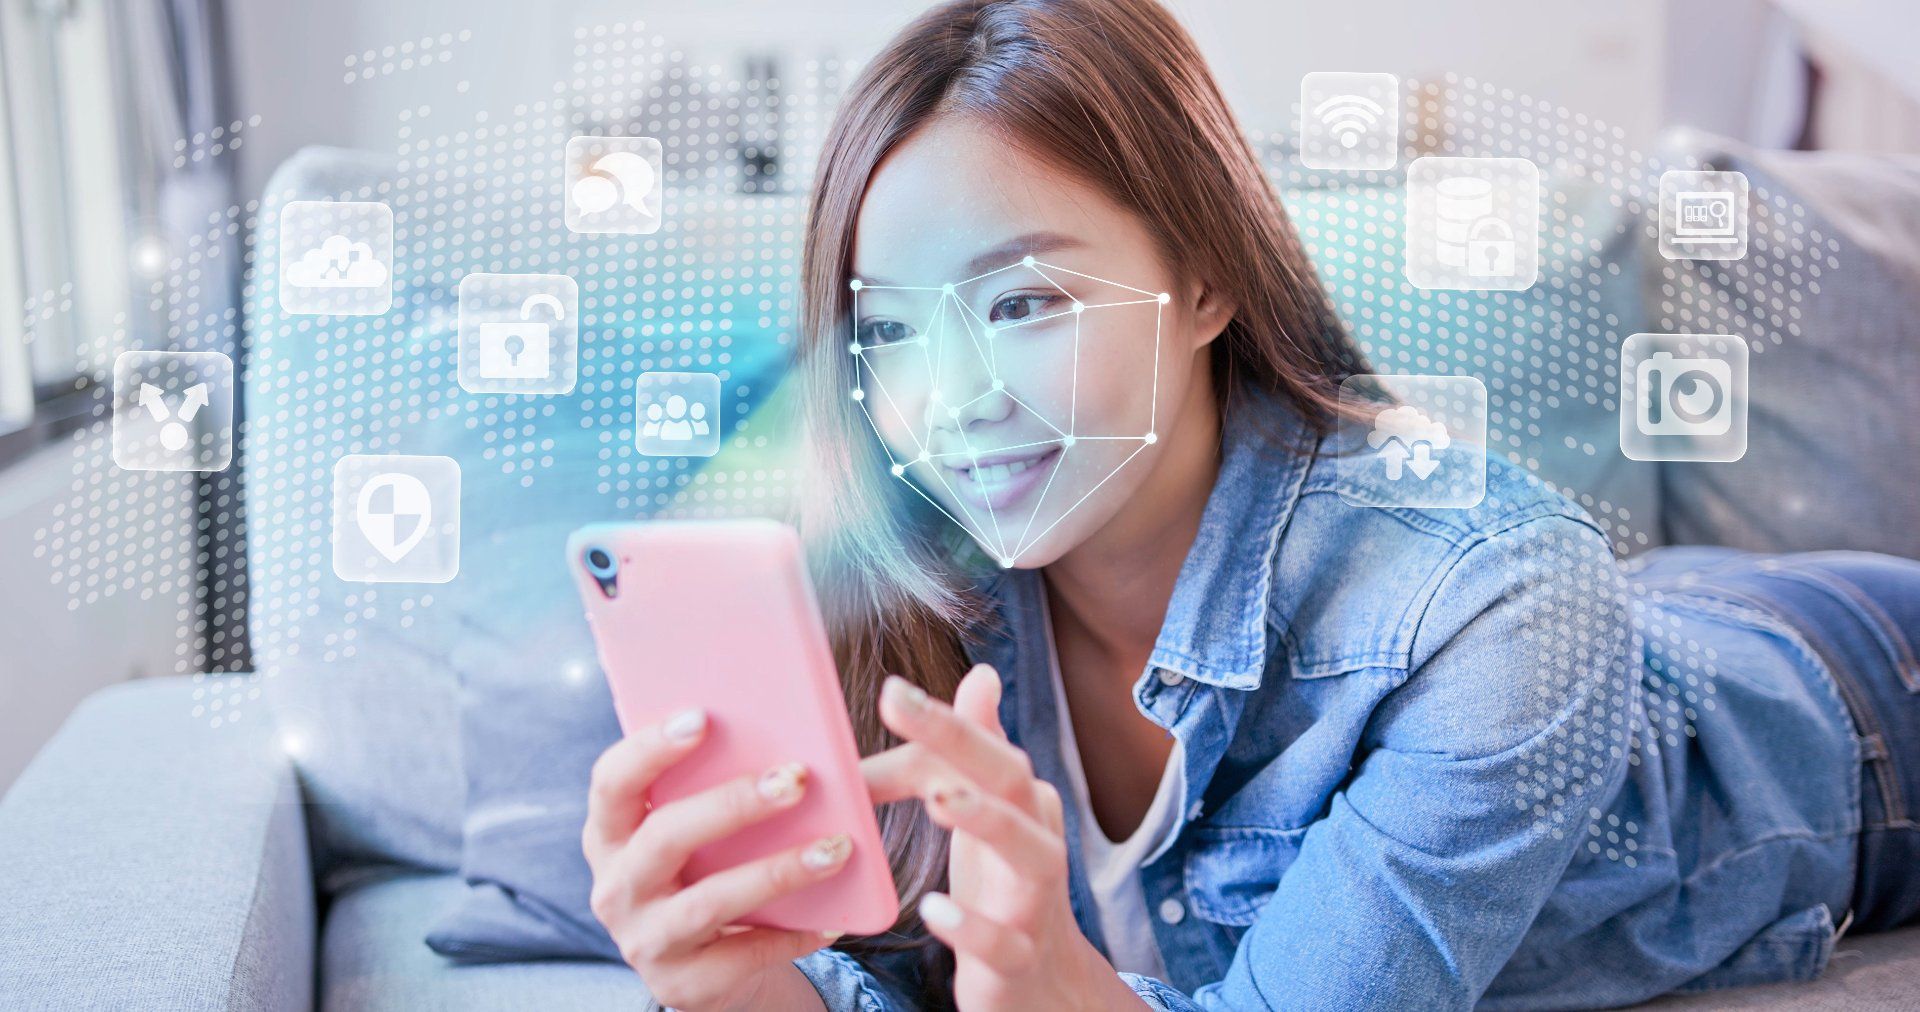 A young woman holds a smartphone as a graphic around her face shows facial recognition software is in use - data privacy